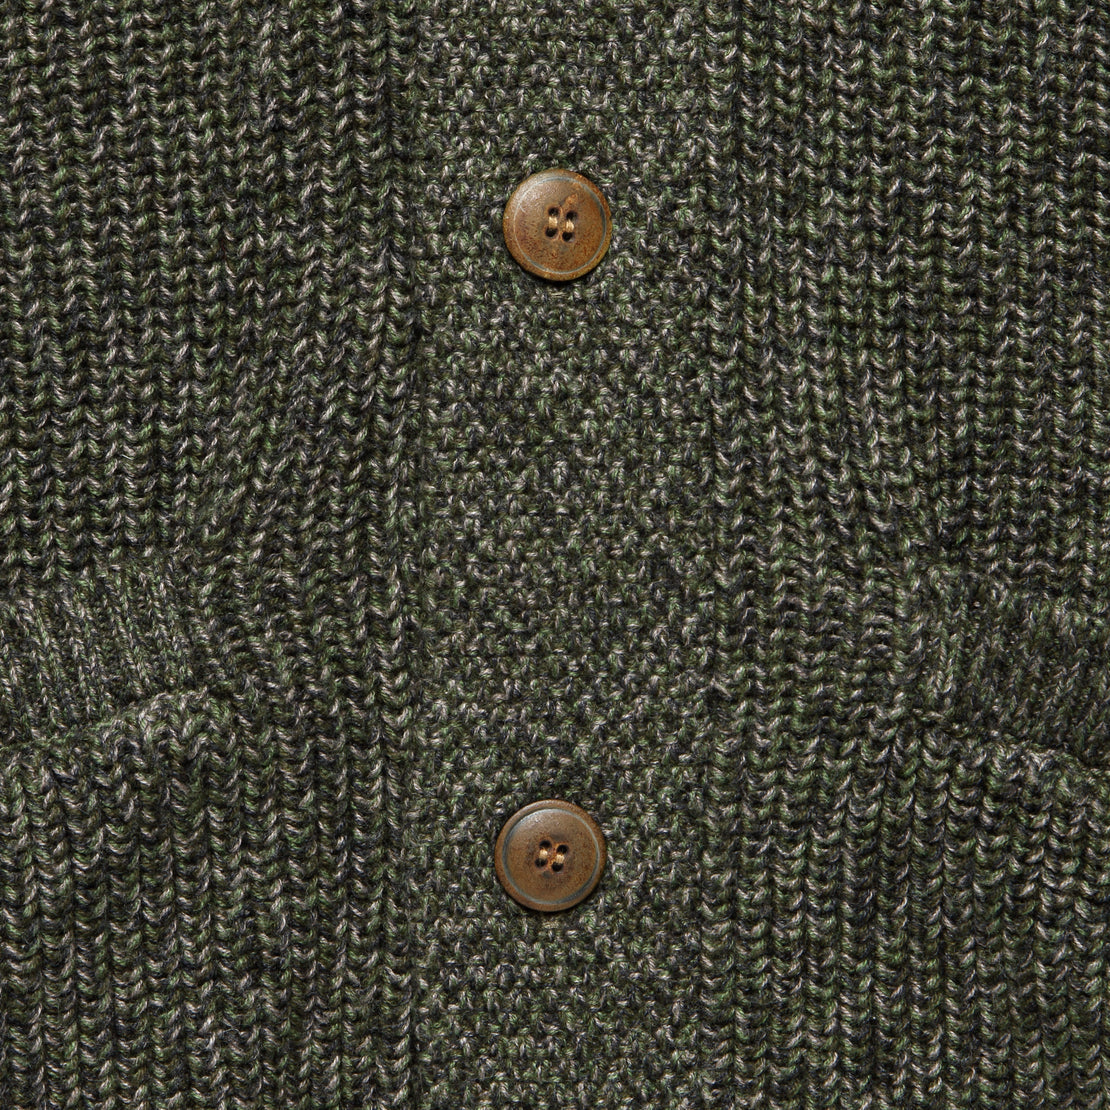 Marled Cotton Cardigan - Olive Peak Marl - Faherty - STAG Provisions - Tops - Sweater